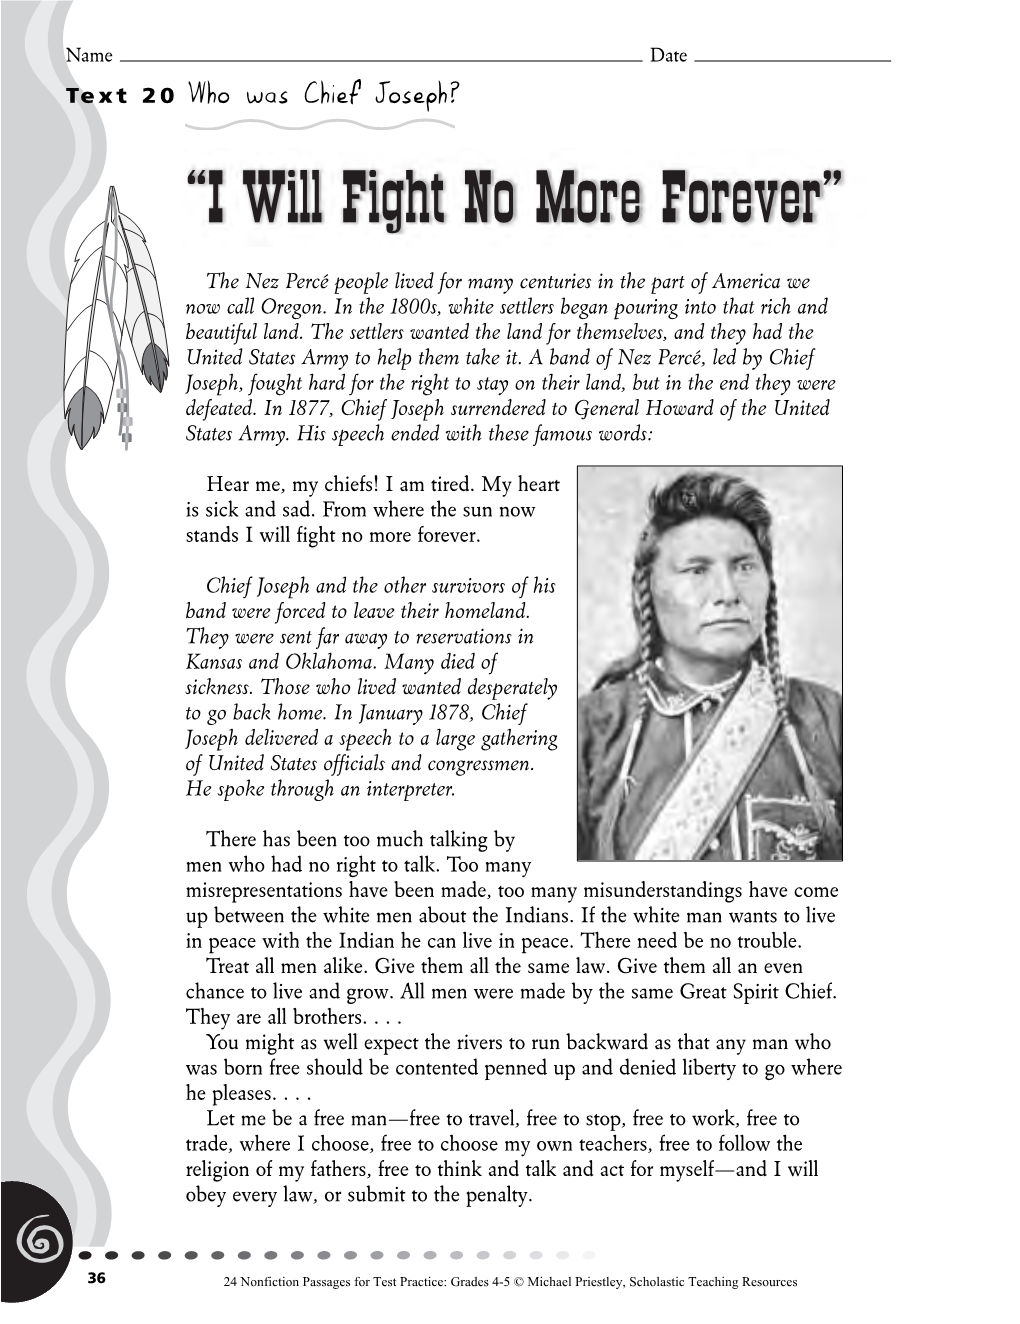 Text 20 Who Was Chief Joseph?